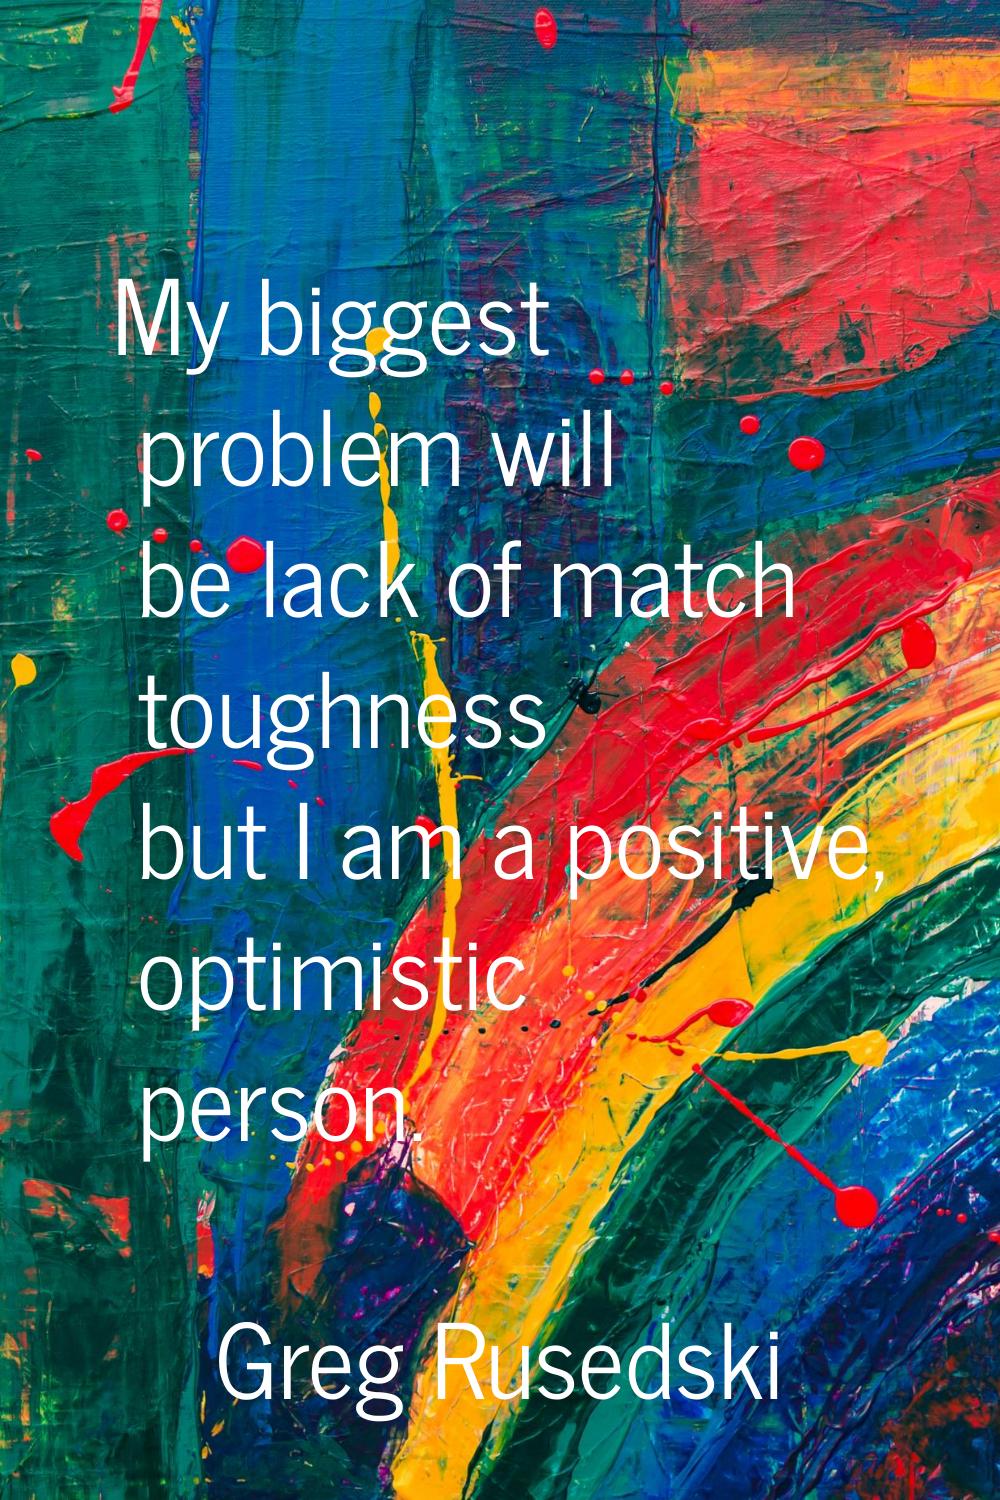 My biggest problem will be lack of match toughness but I am a positive, optimistic person.